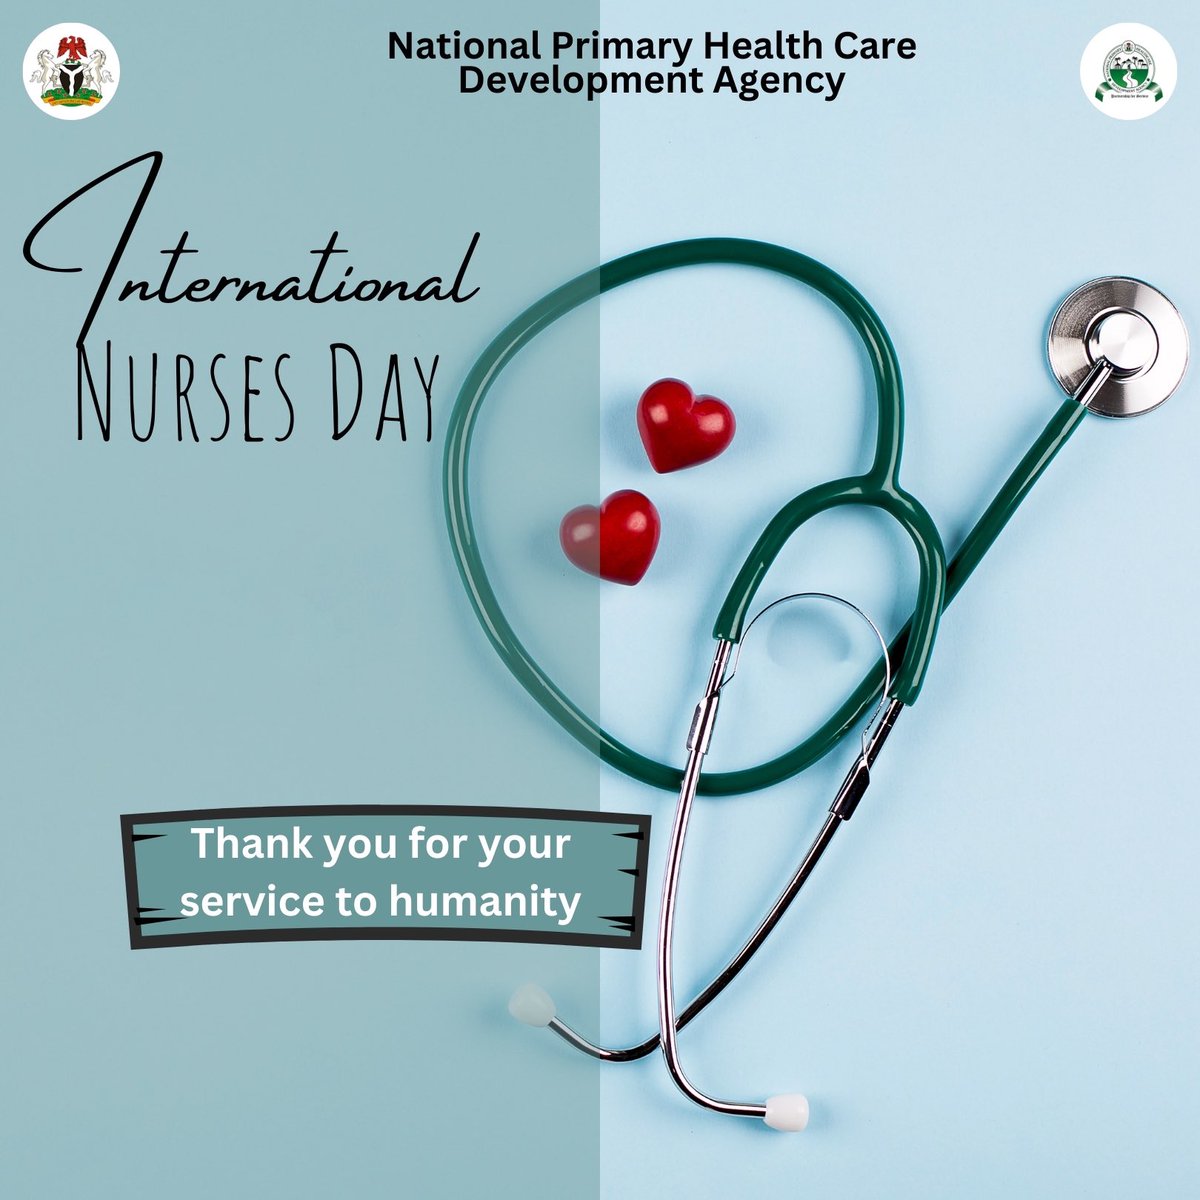 Today and every day, we express our gratitude to the dedicated nurses who bravely put themselves on the front lines to care for us all. Your vital work, especially now, is deeply appreciated as you tirelessly care for our loved ones. Happy International Nurses Day! 🎉